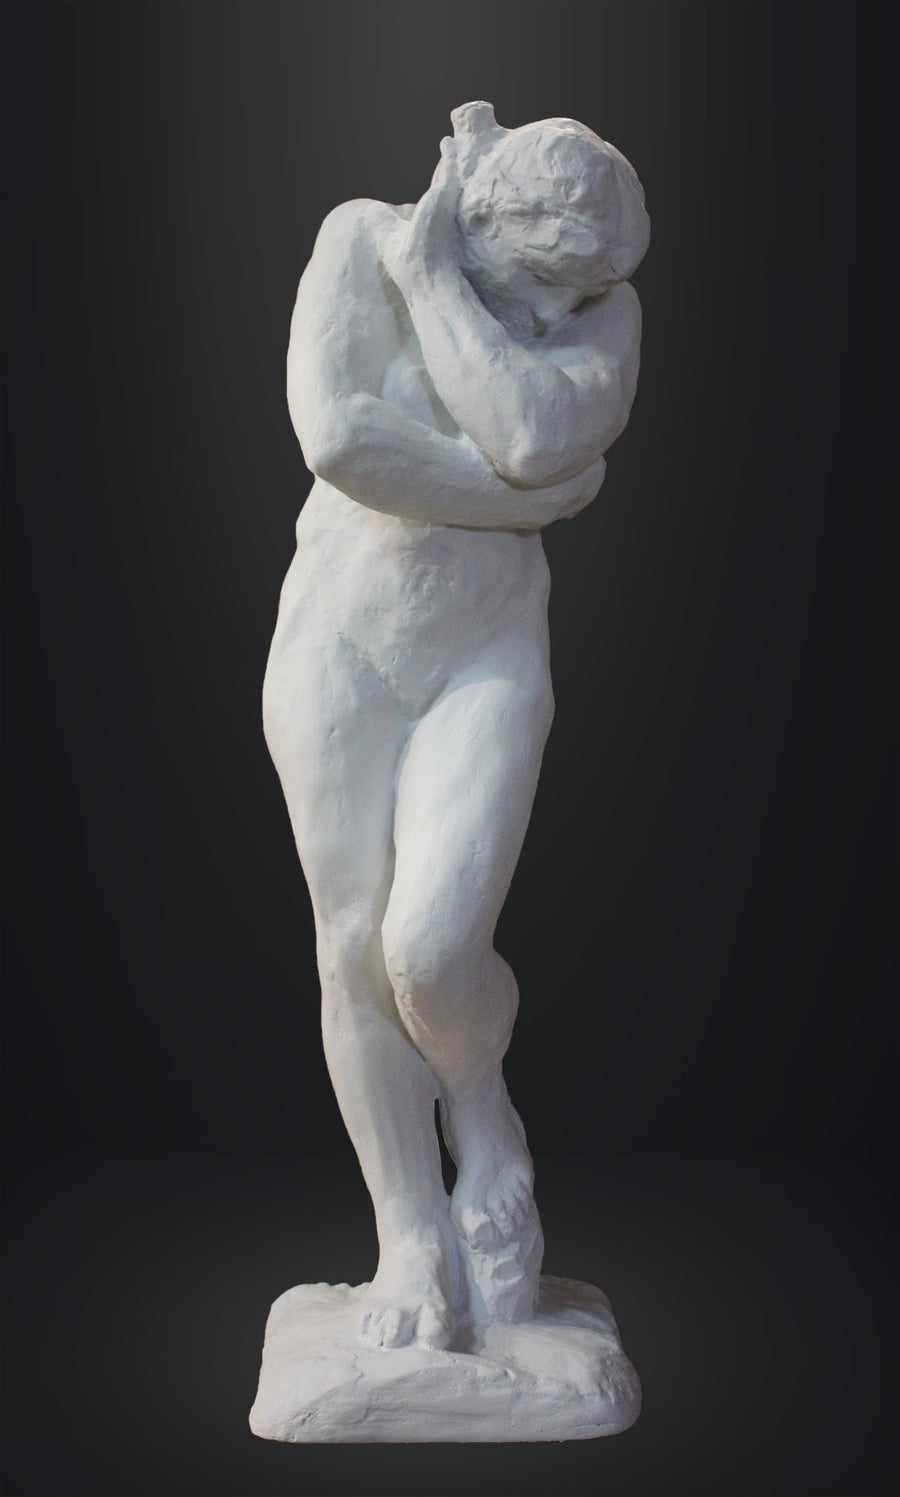 photo of white plaster cast sculpture of nude female figure hugging herself against gray background